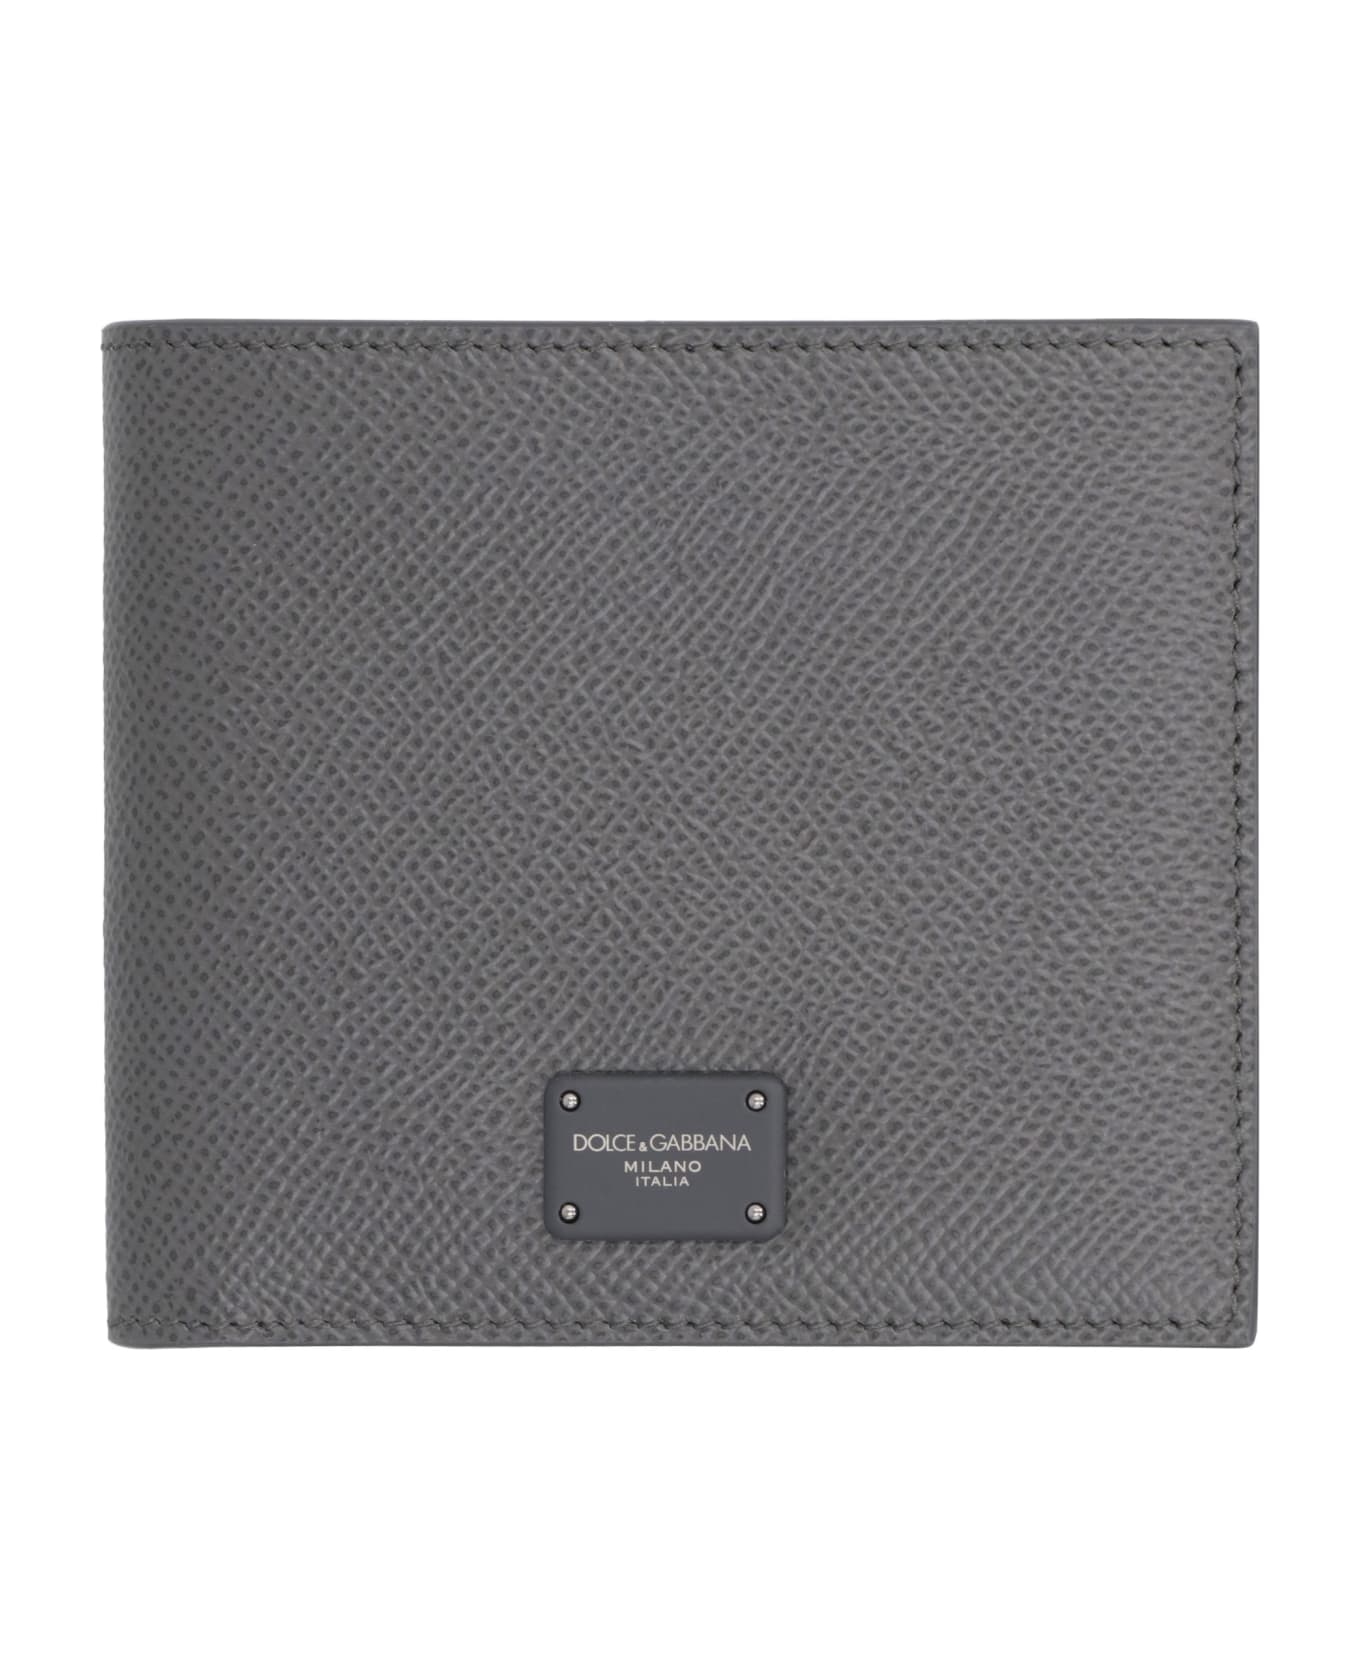 Dolce & Gabbana Leather Flap-over Wallet - grey 財布